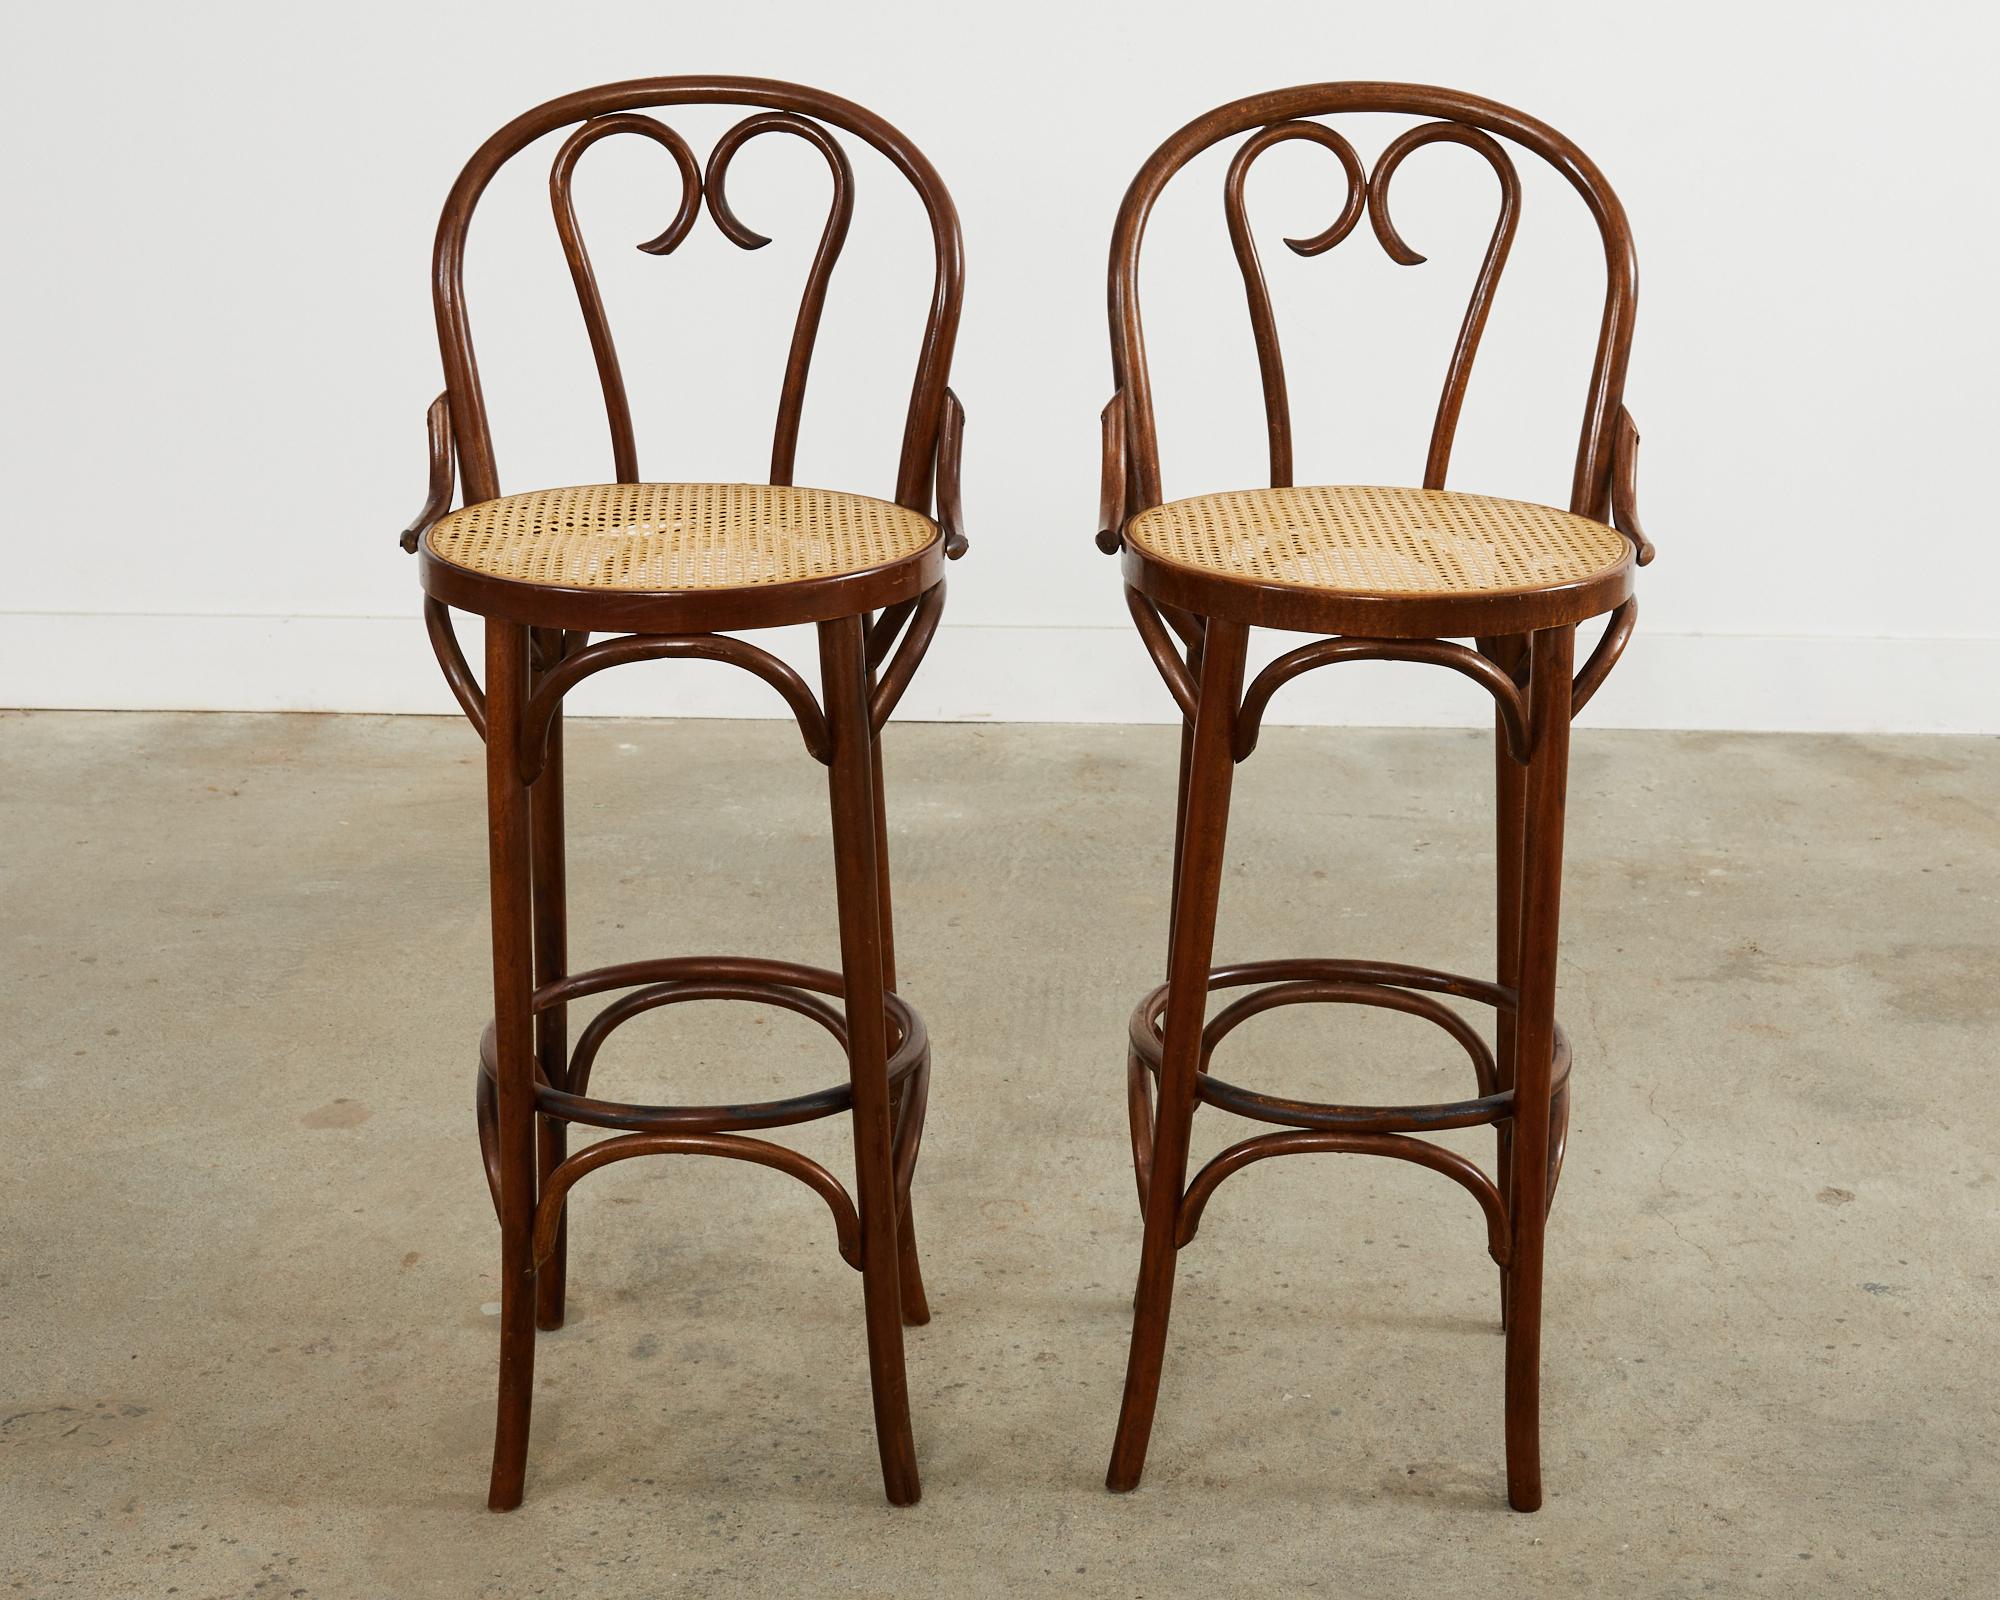 Rare pair of mid-century modern bar stools crafted from bentwood after Thonet. The stools feature a classic heart motif back crafted from gracefully curved beech. The round seat has woven cane inset and is supported by long straight legs conjoined